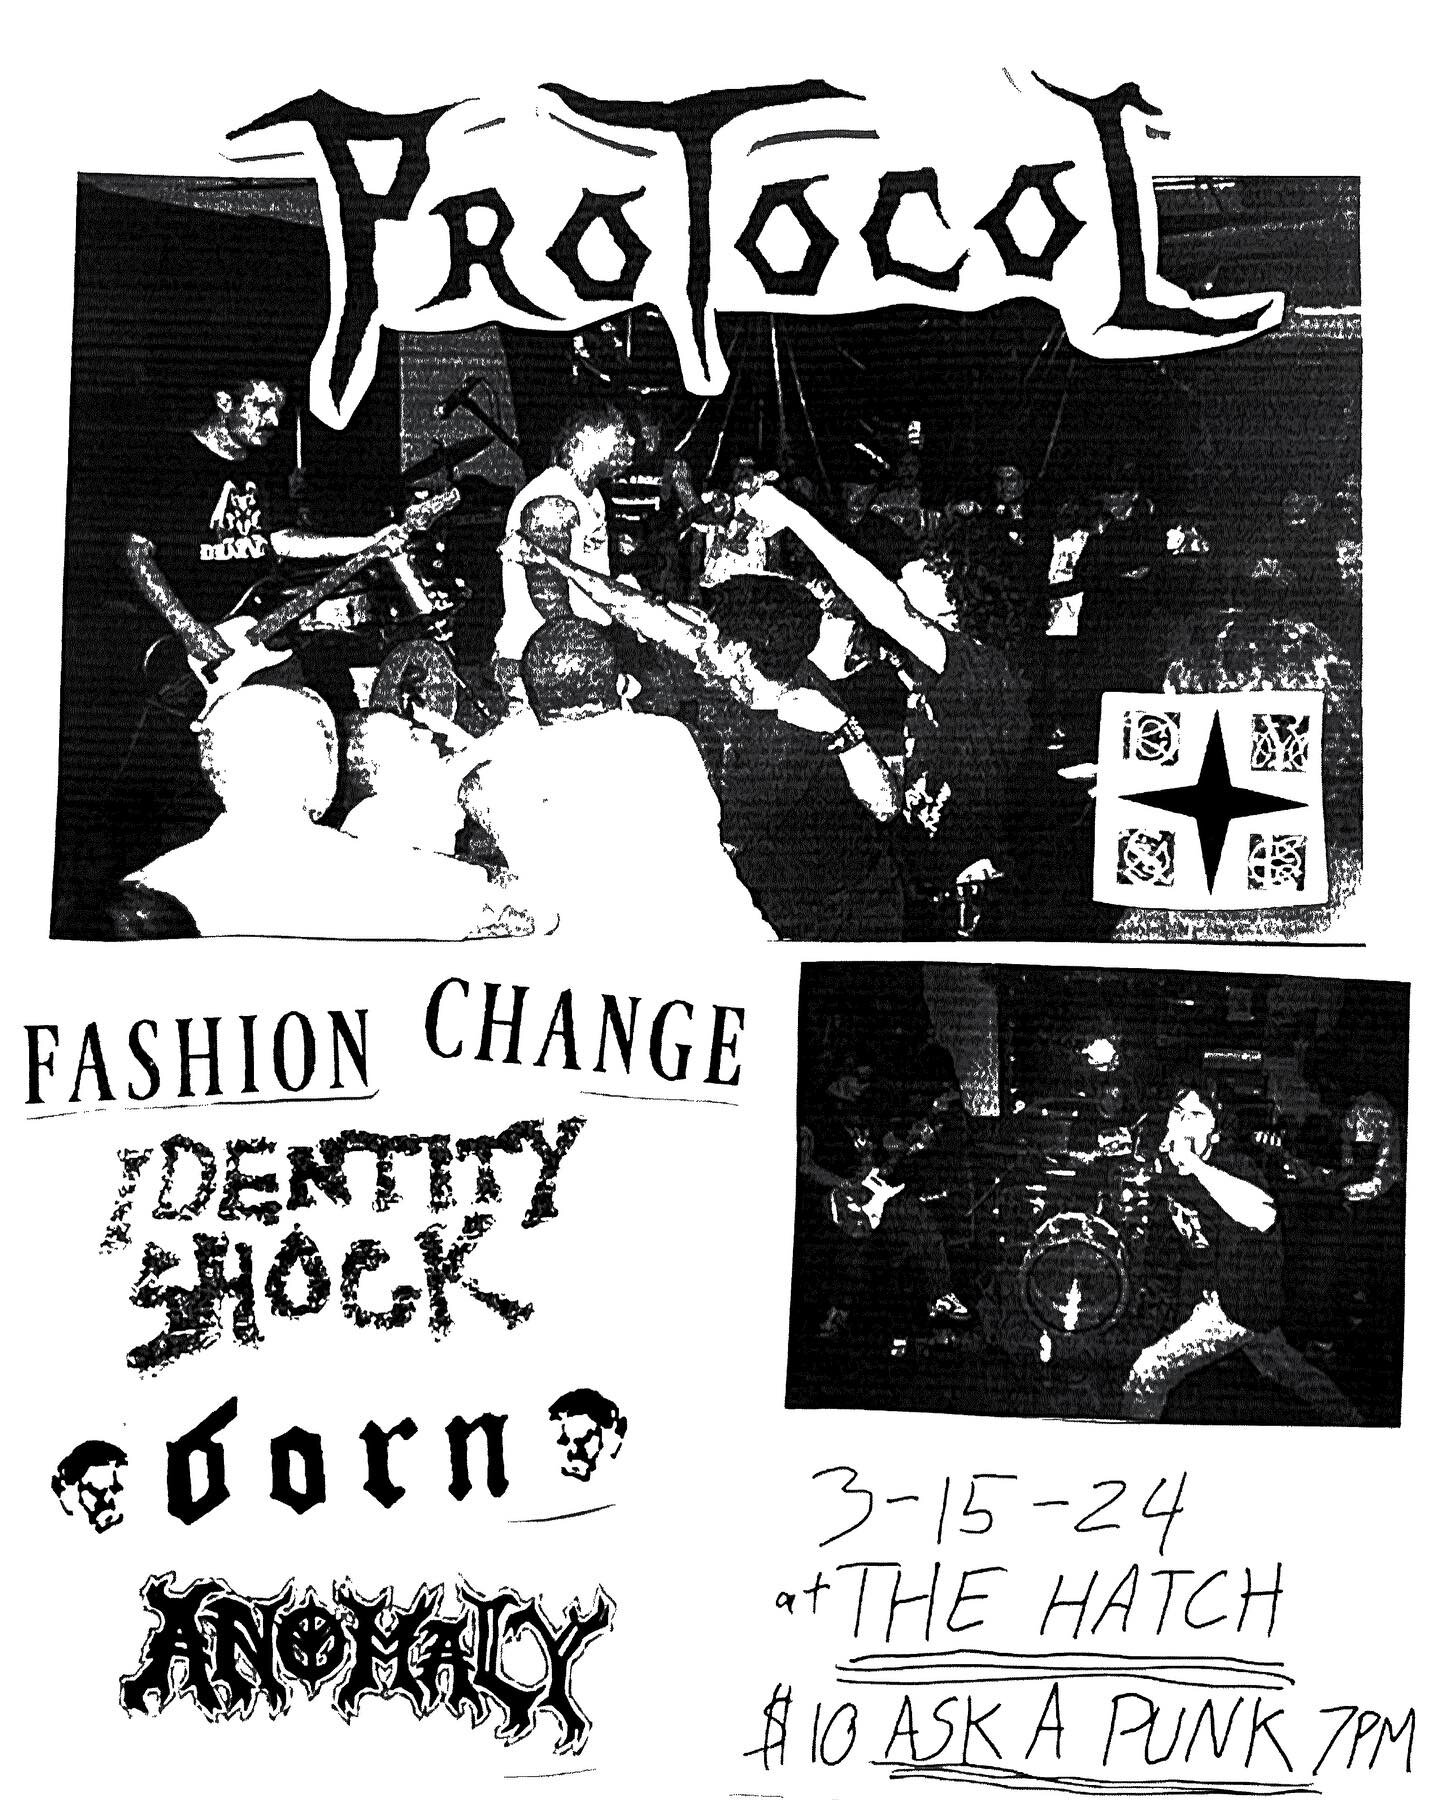 2 WEEKS OUT: HARDCORE IS BACK AT THE HATCH. Two of the most ferocious acts in the nation take over 1515 Hatch in a violent display: Florida&rsquo;s PROTOCOL making their long awaited Birmingham return, with PNW&rsquo;s most abrasive offering FASION C